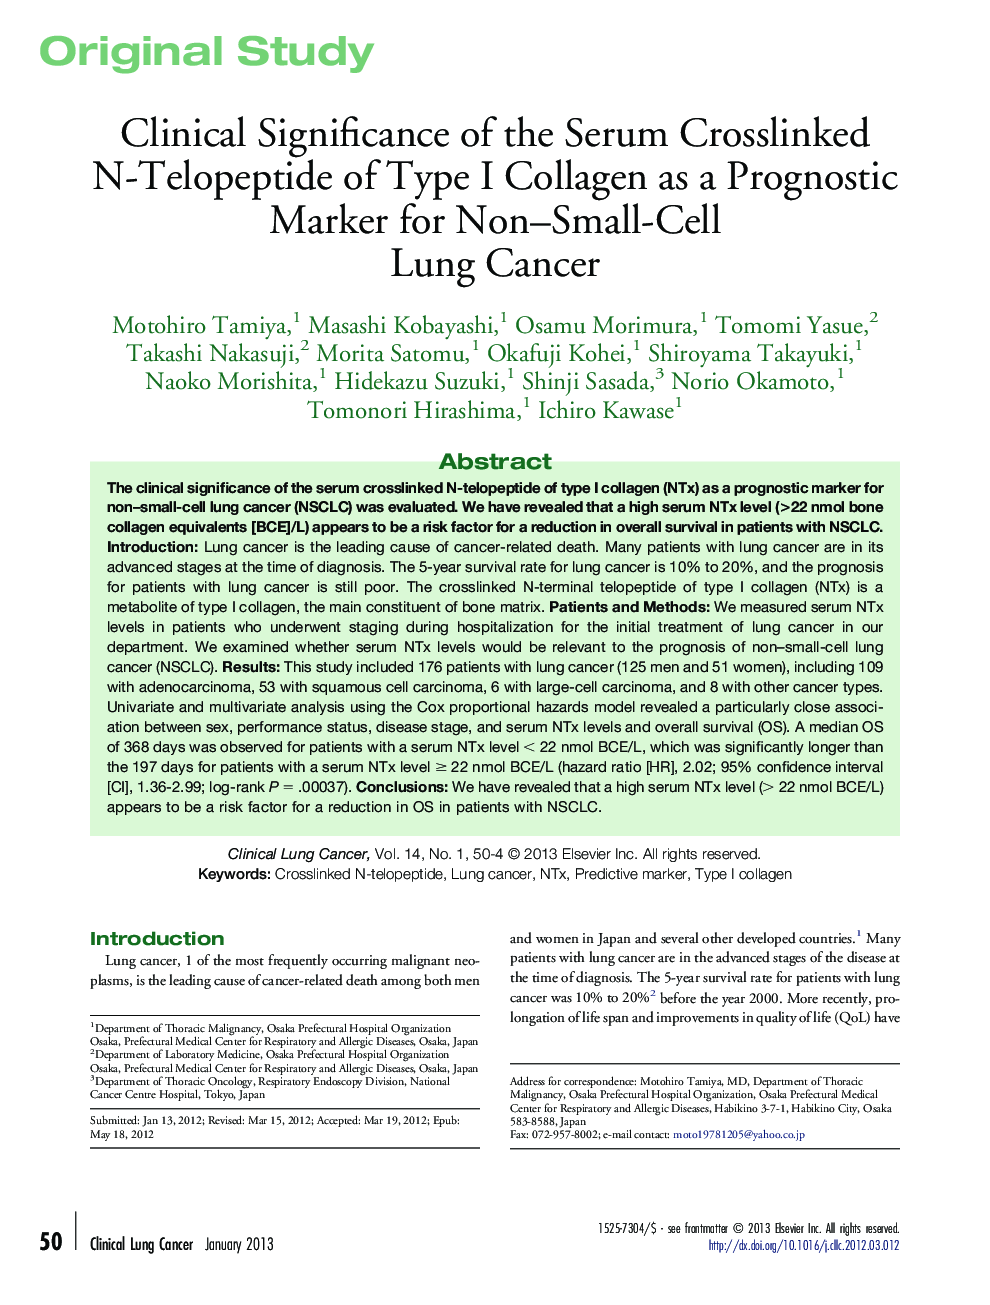 Clinical Significance of the Serum Crosslinked N-Telopeptide of Type I Collagen as a Prognostic Marker for Non–Small-Cell Lung Cancer